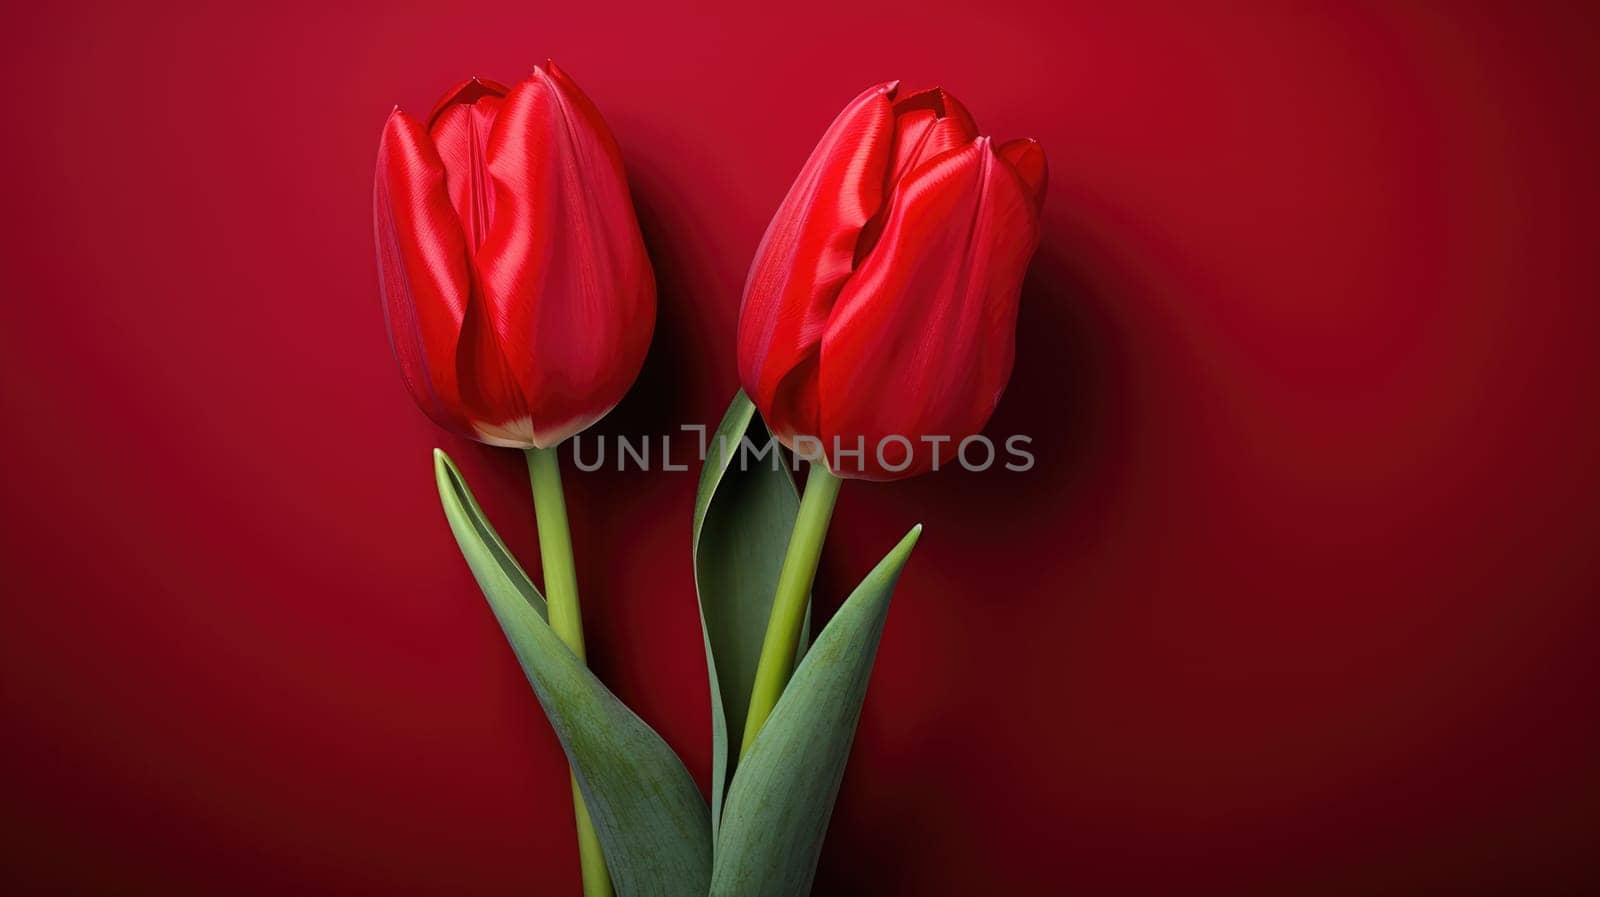 Wonderful spring tulips on red background. Top view image. Copy space by JuliaDorian